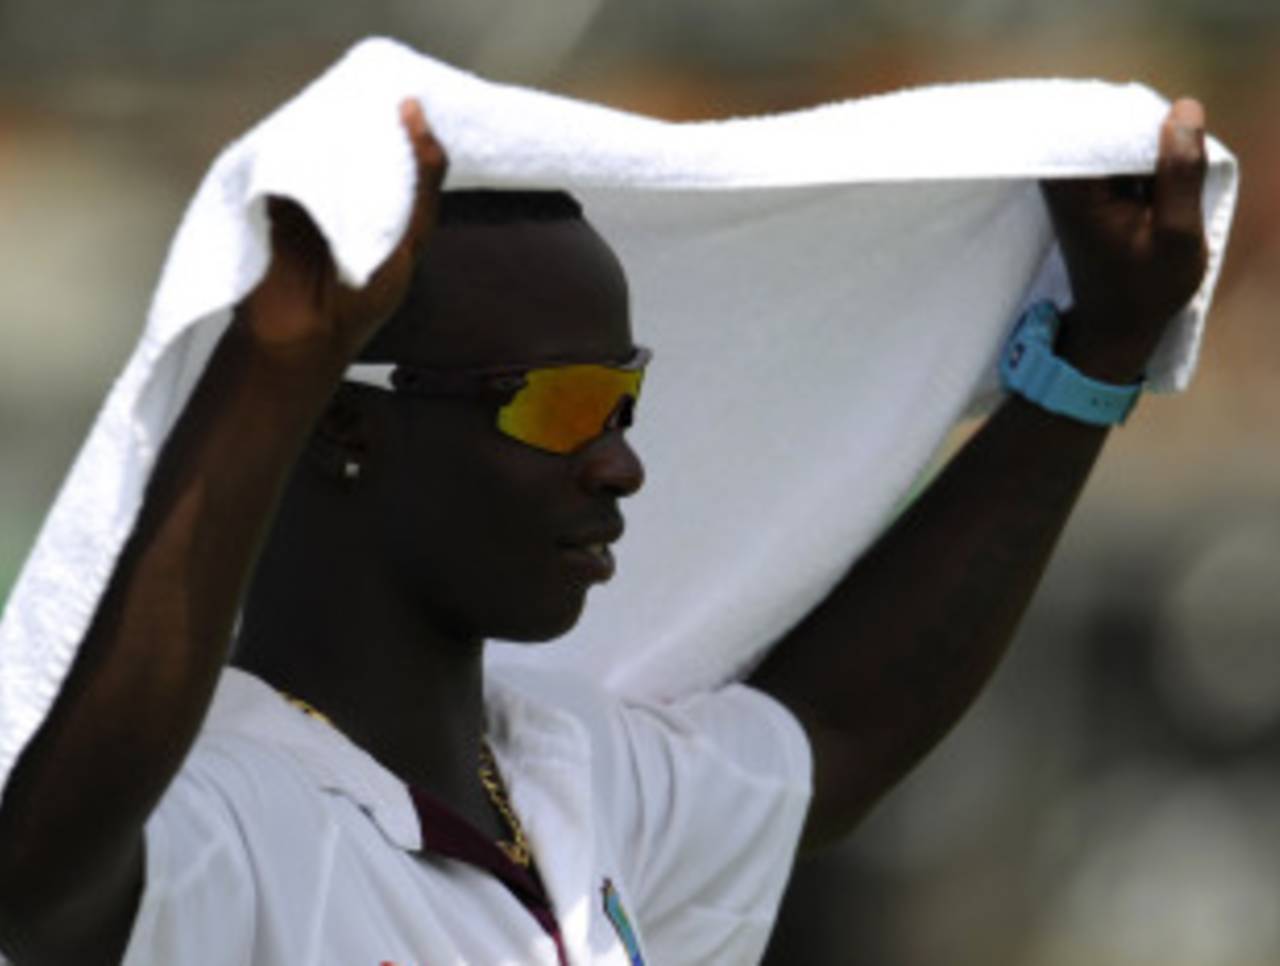 Kemar Roach takes a breather, West Indies v Pakistan, 2nd Test, St Kitts, 3rd day, May 22, 2011